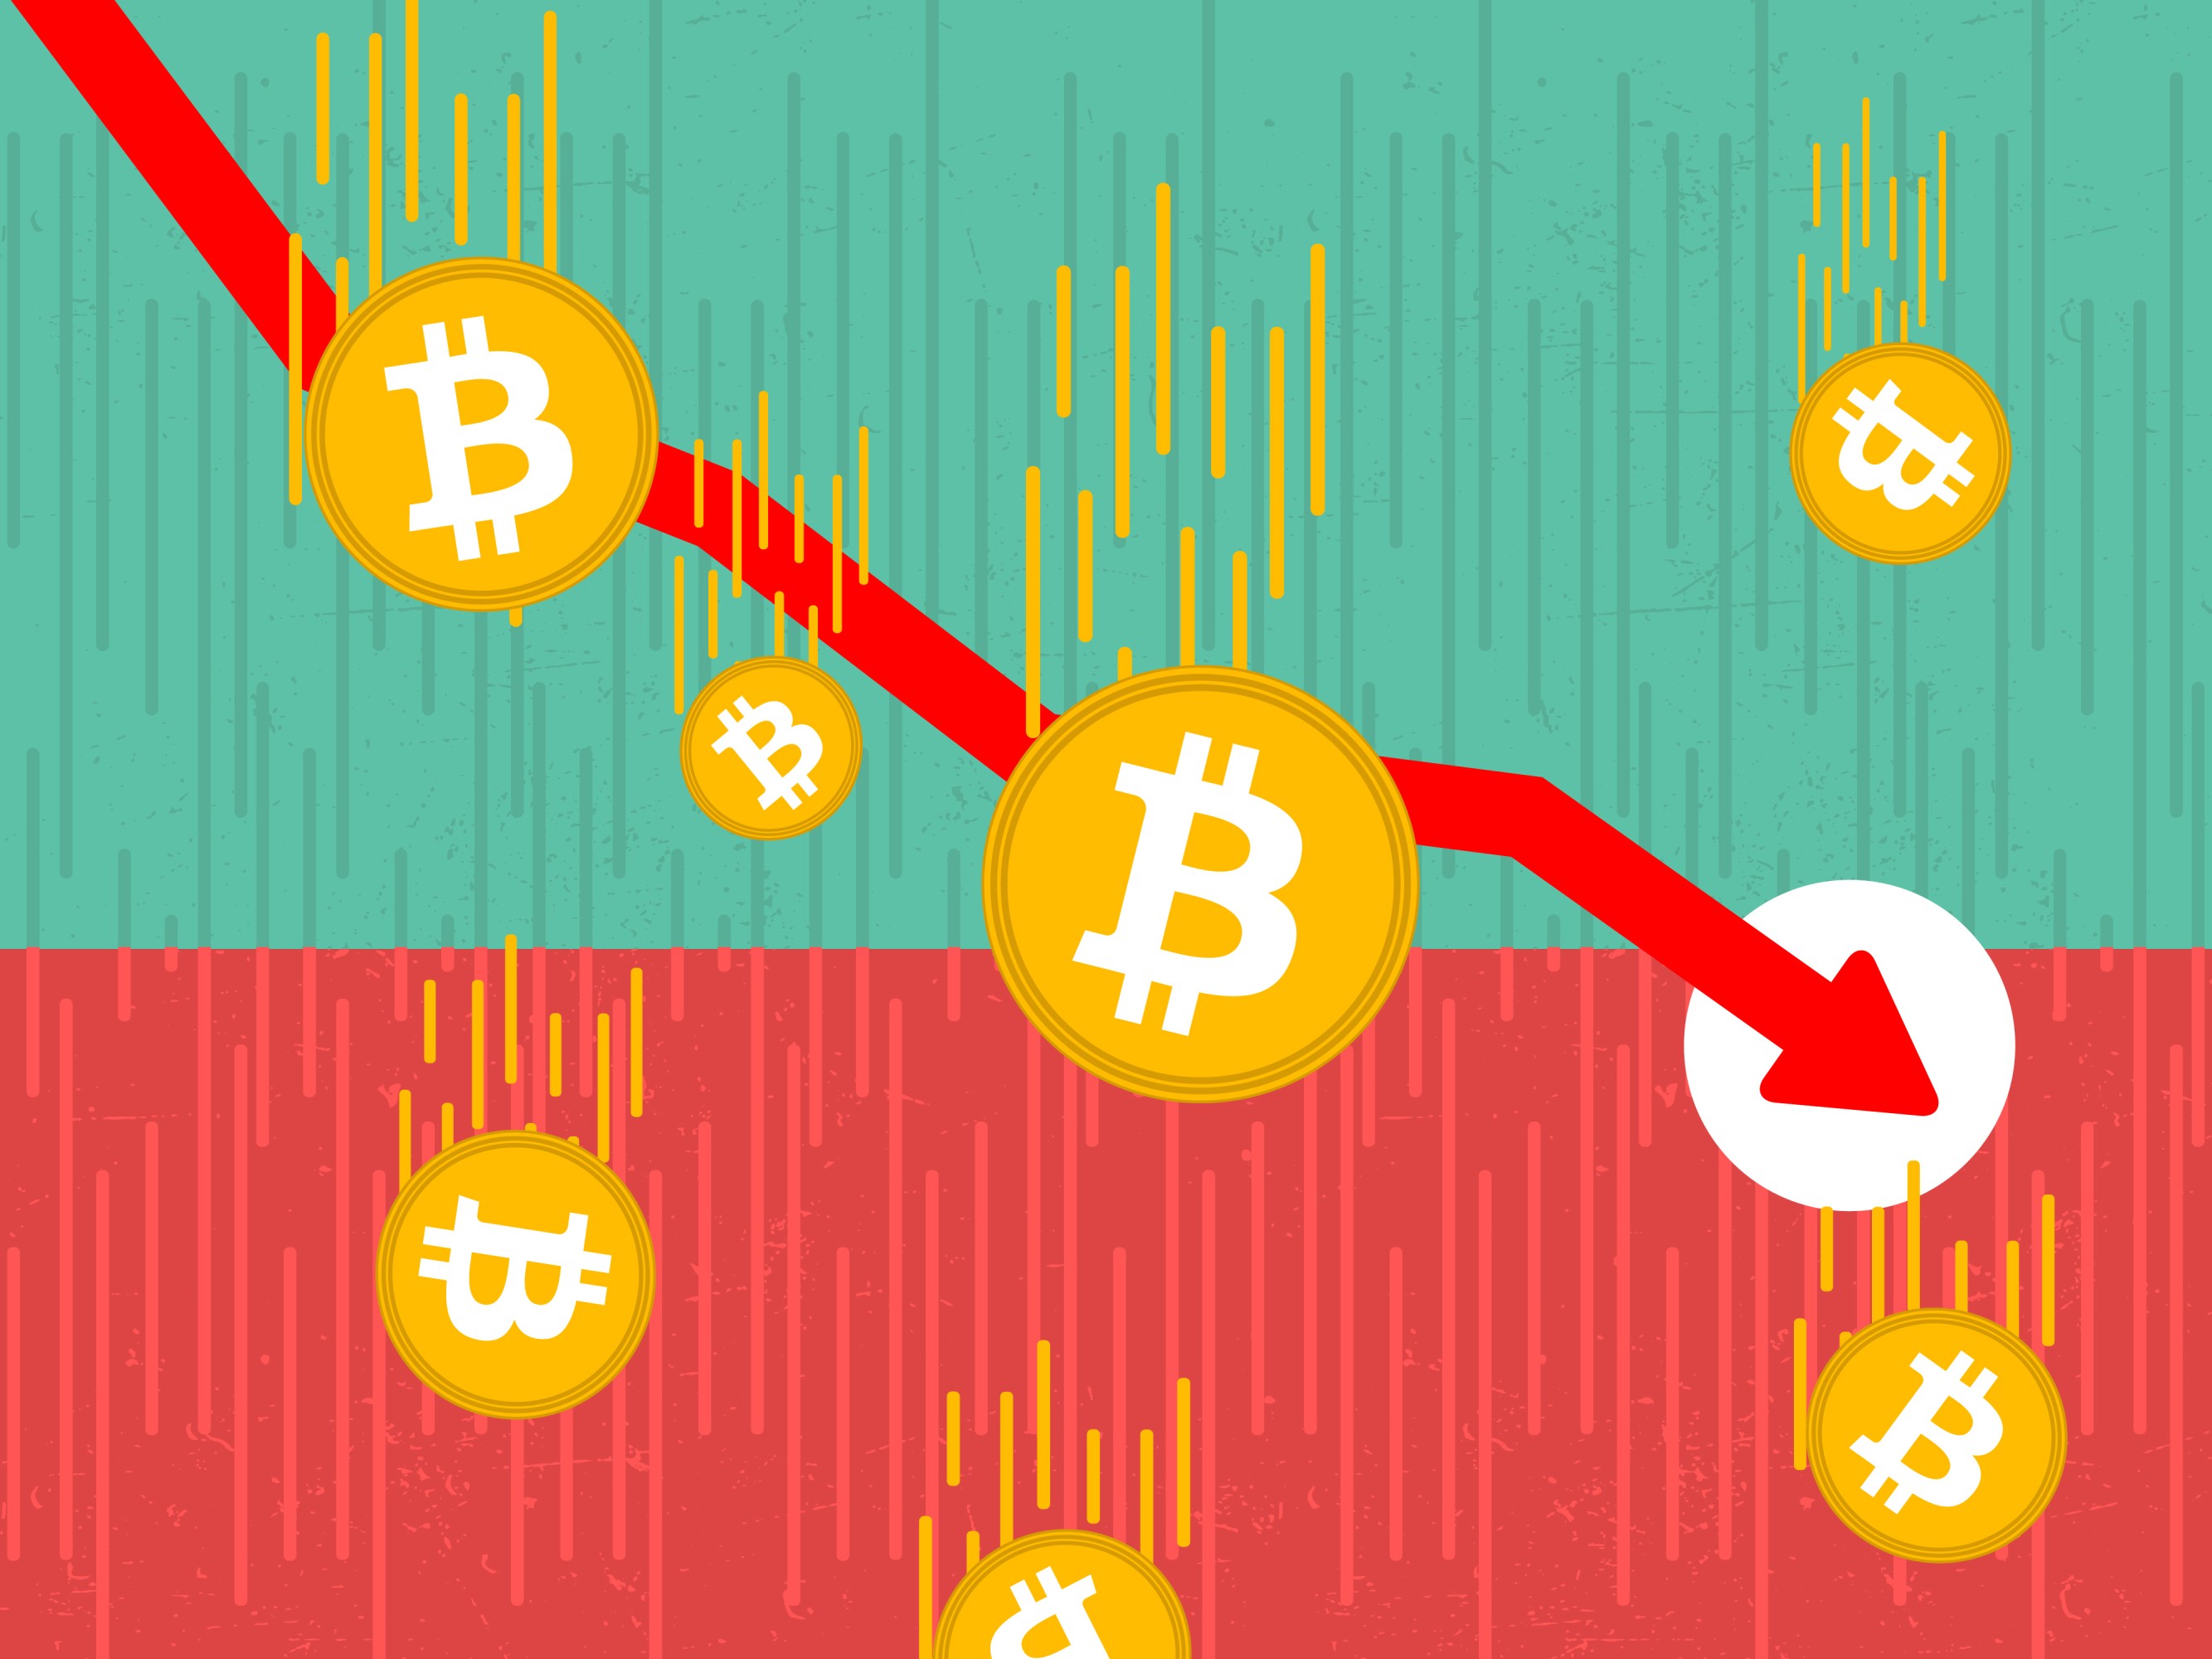 If spot bitcoin ETFs are so great, why’s the bitcoin price down?